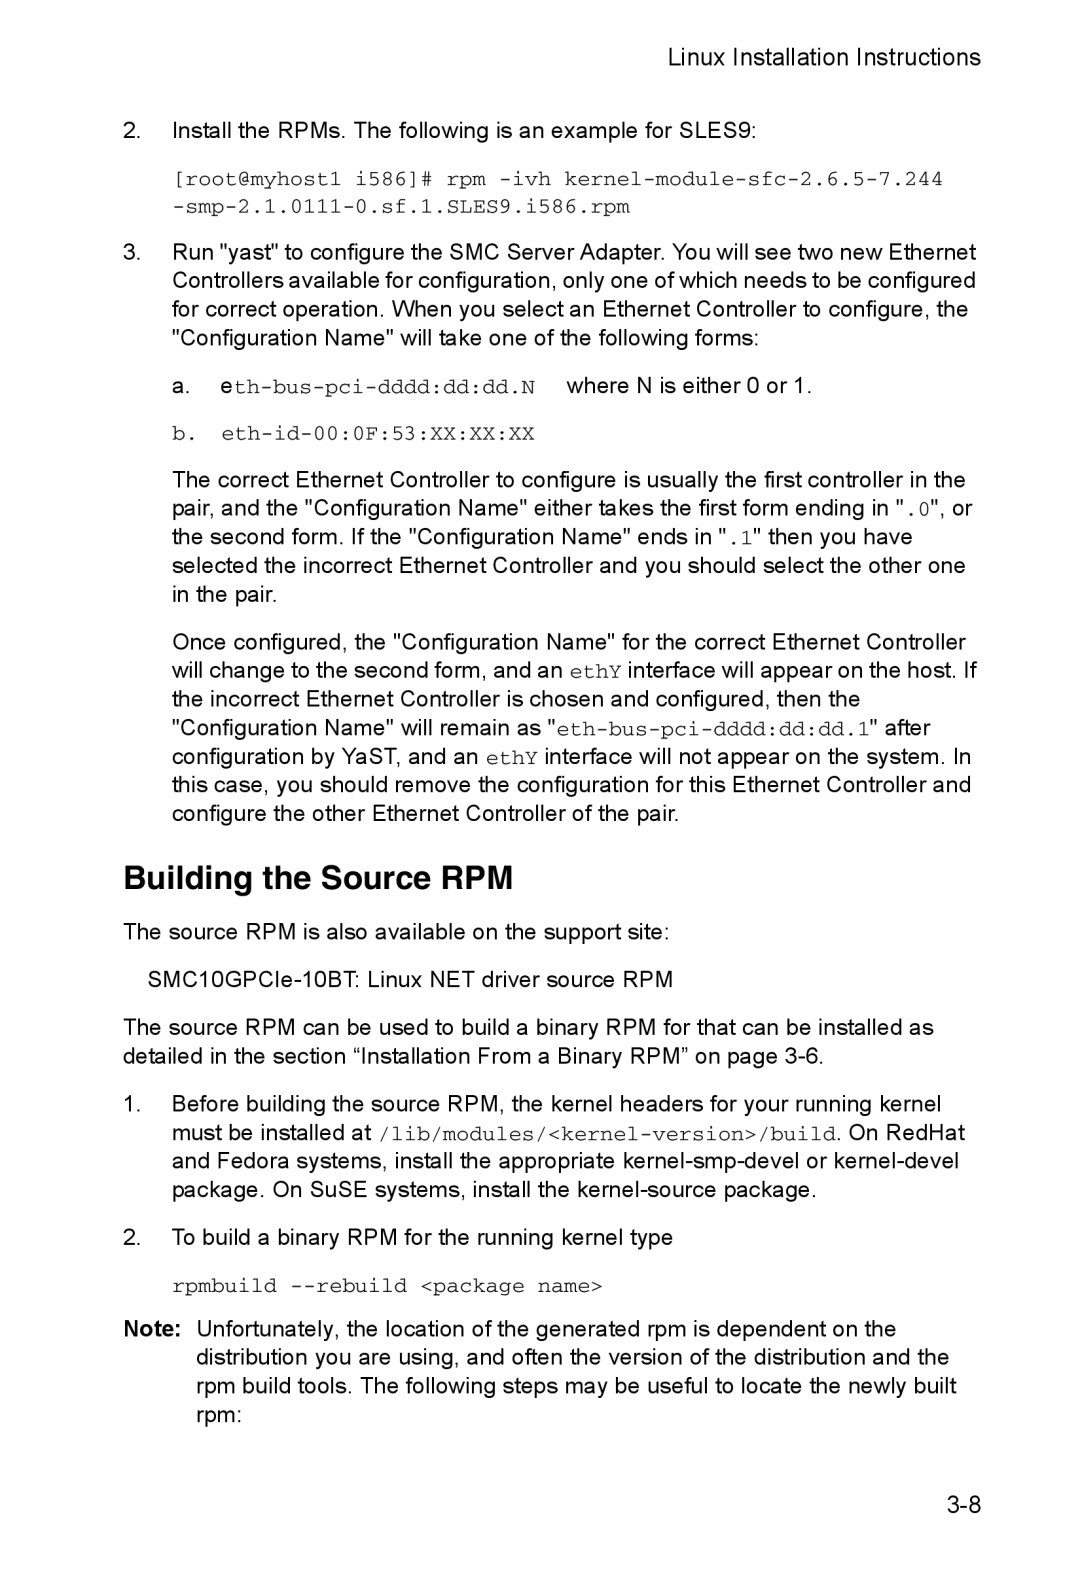 SMC Networks SMC10GPCIe-XFP manual Building the Source RPM, Install the RPMs. The following is an example for SLES9 